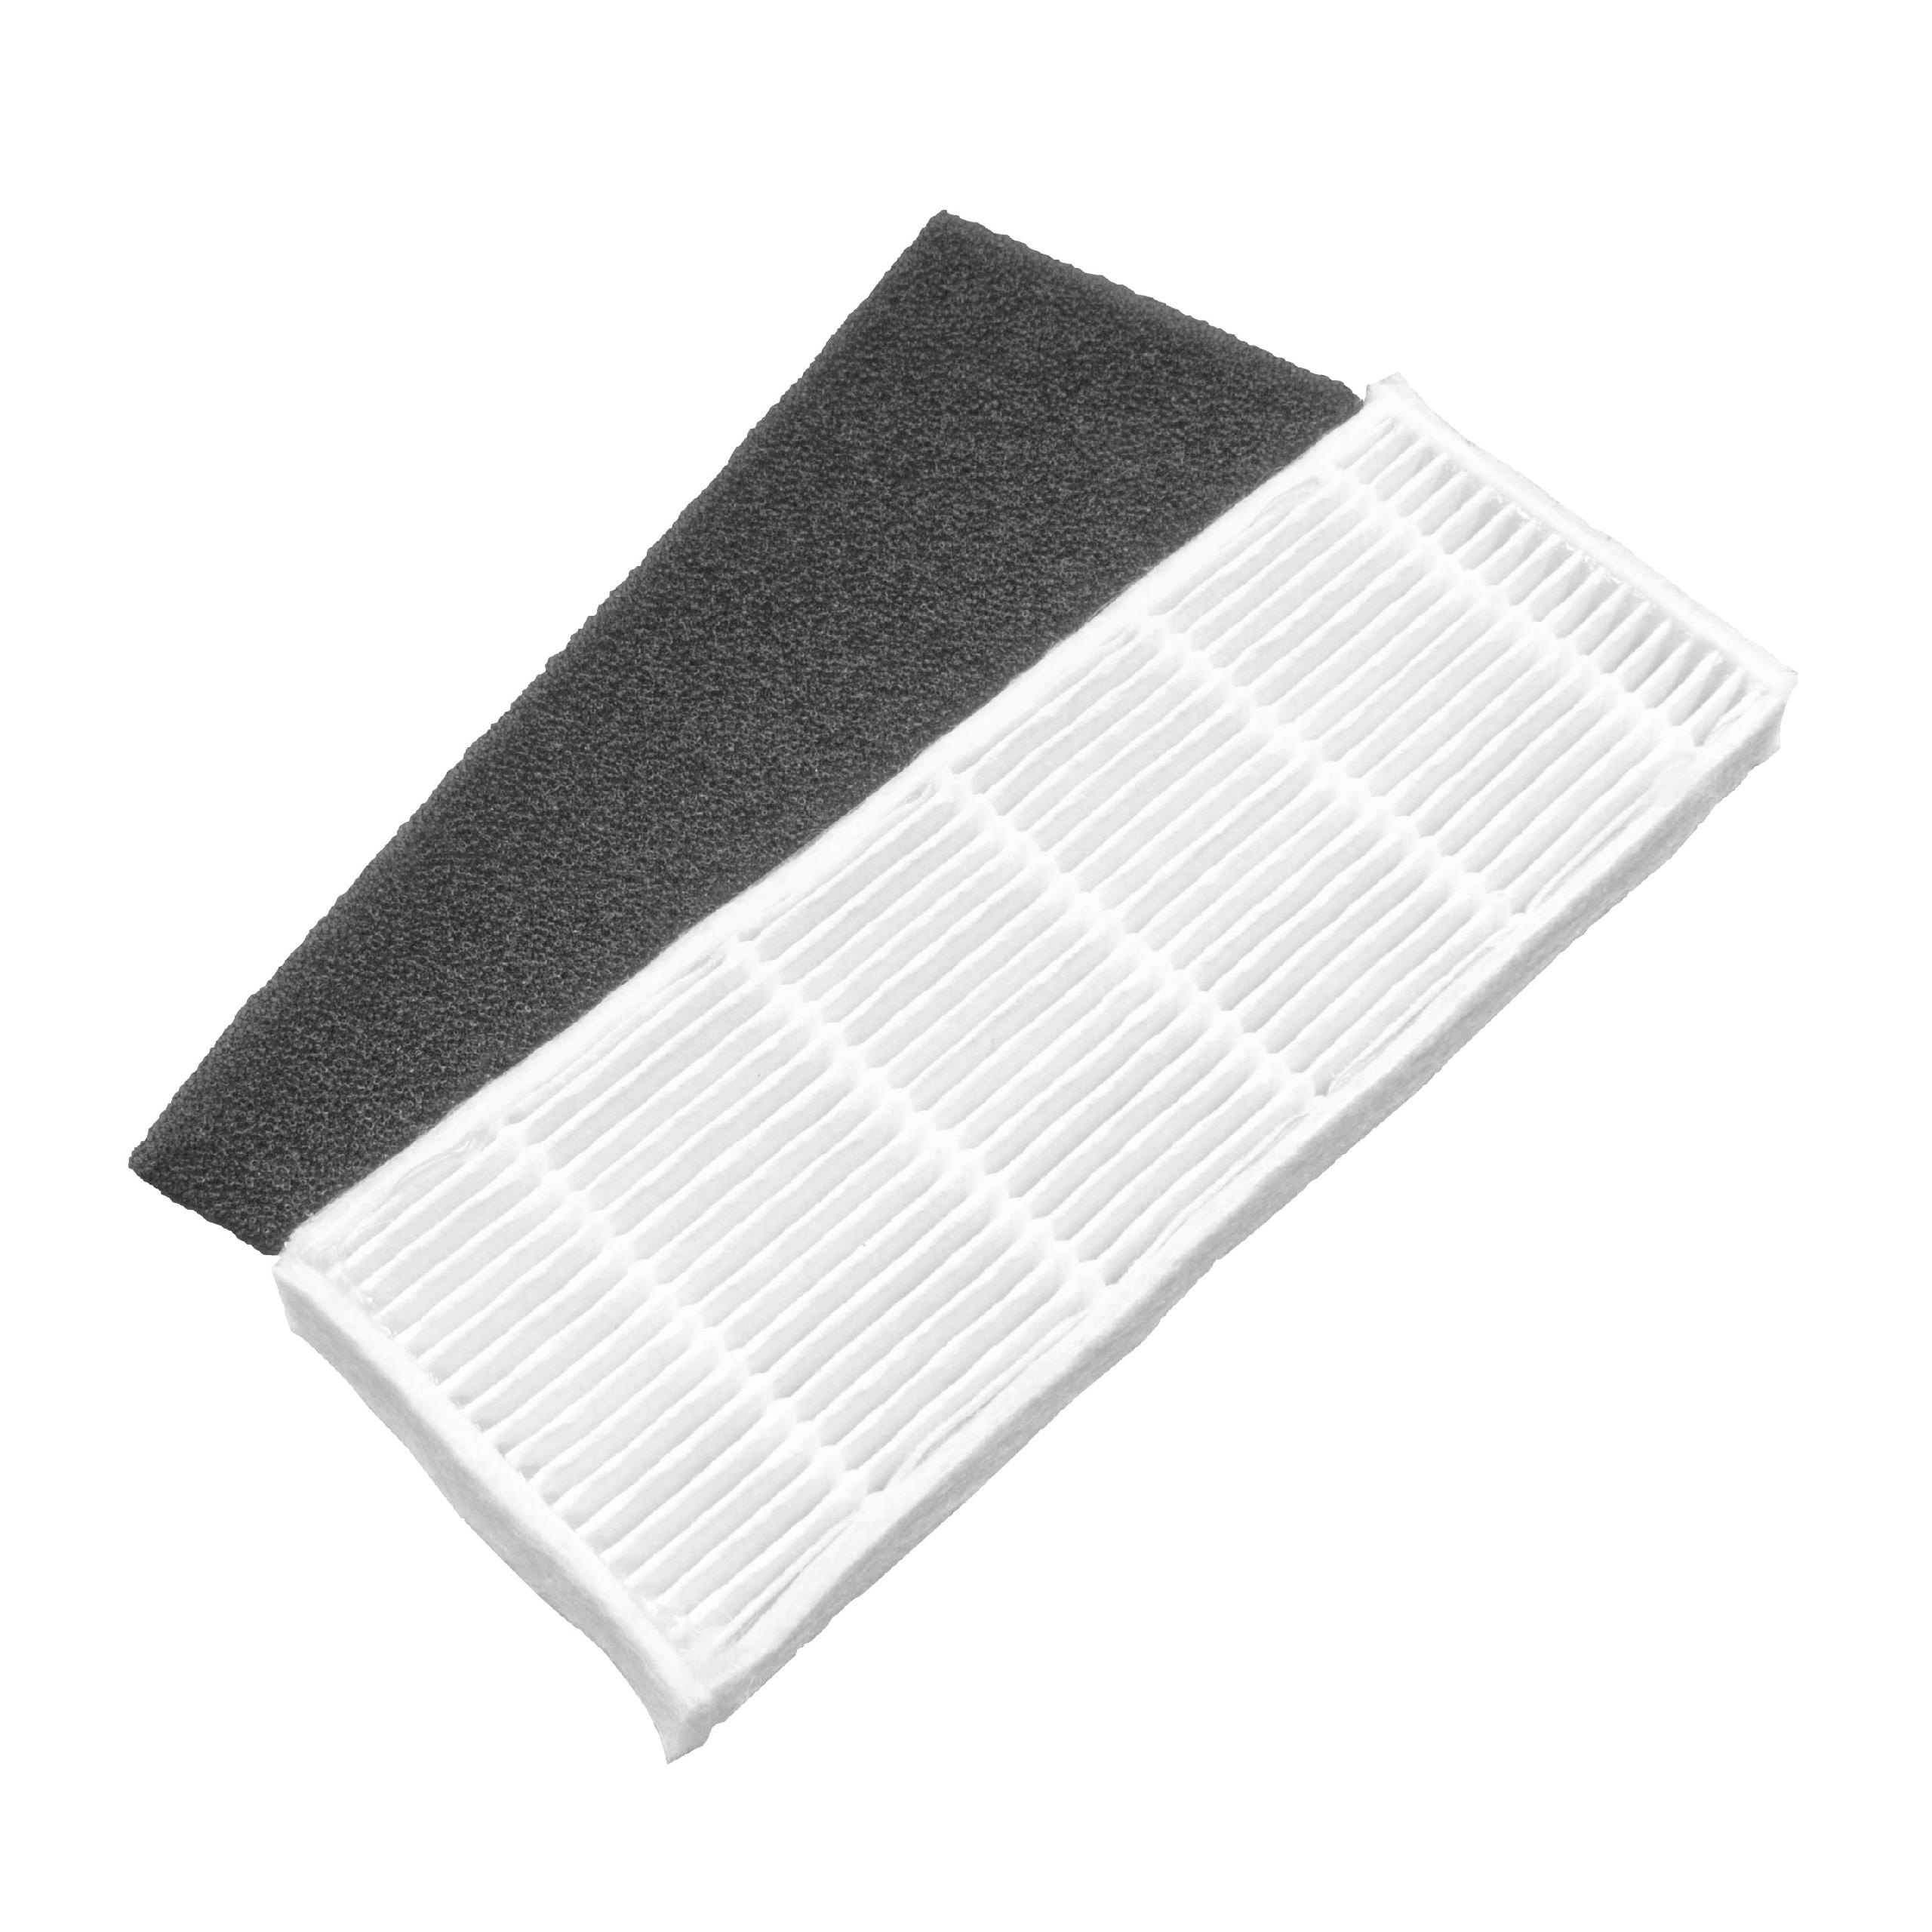 1x Combi-Filter replaces Ecovacs D-S762 for Ecovacs Vacuum Cleaner - 